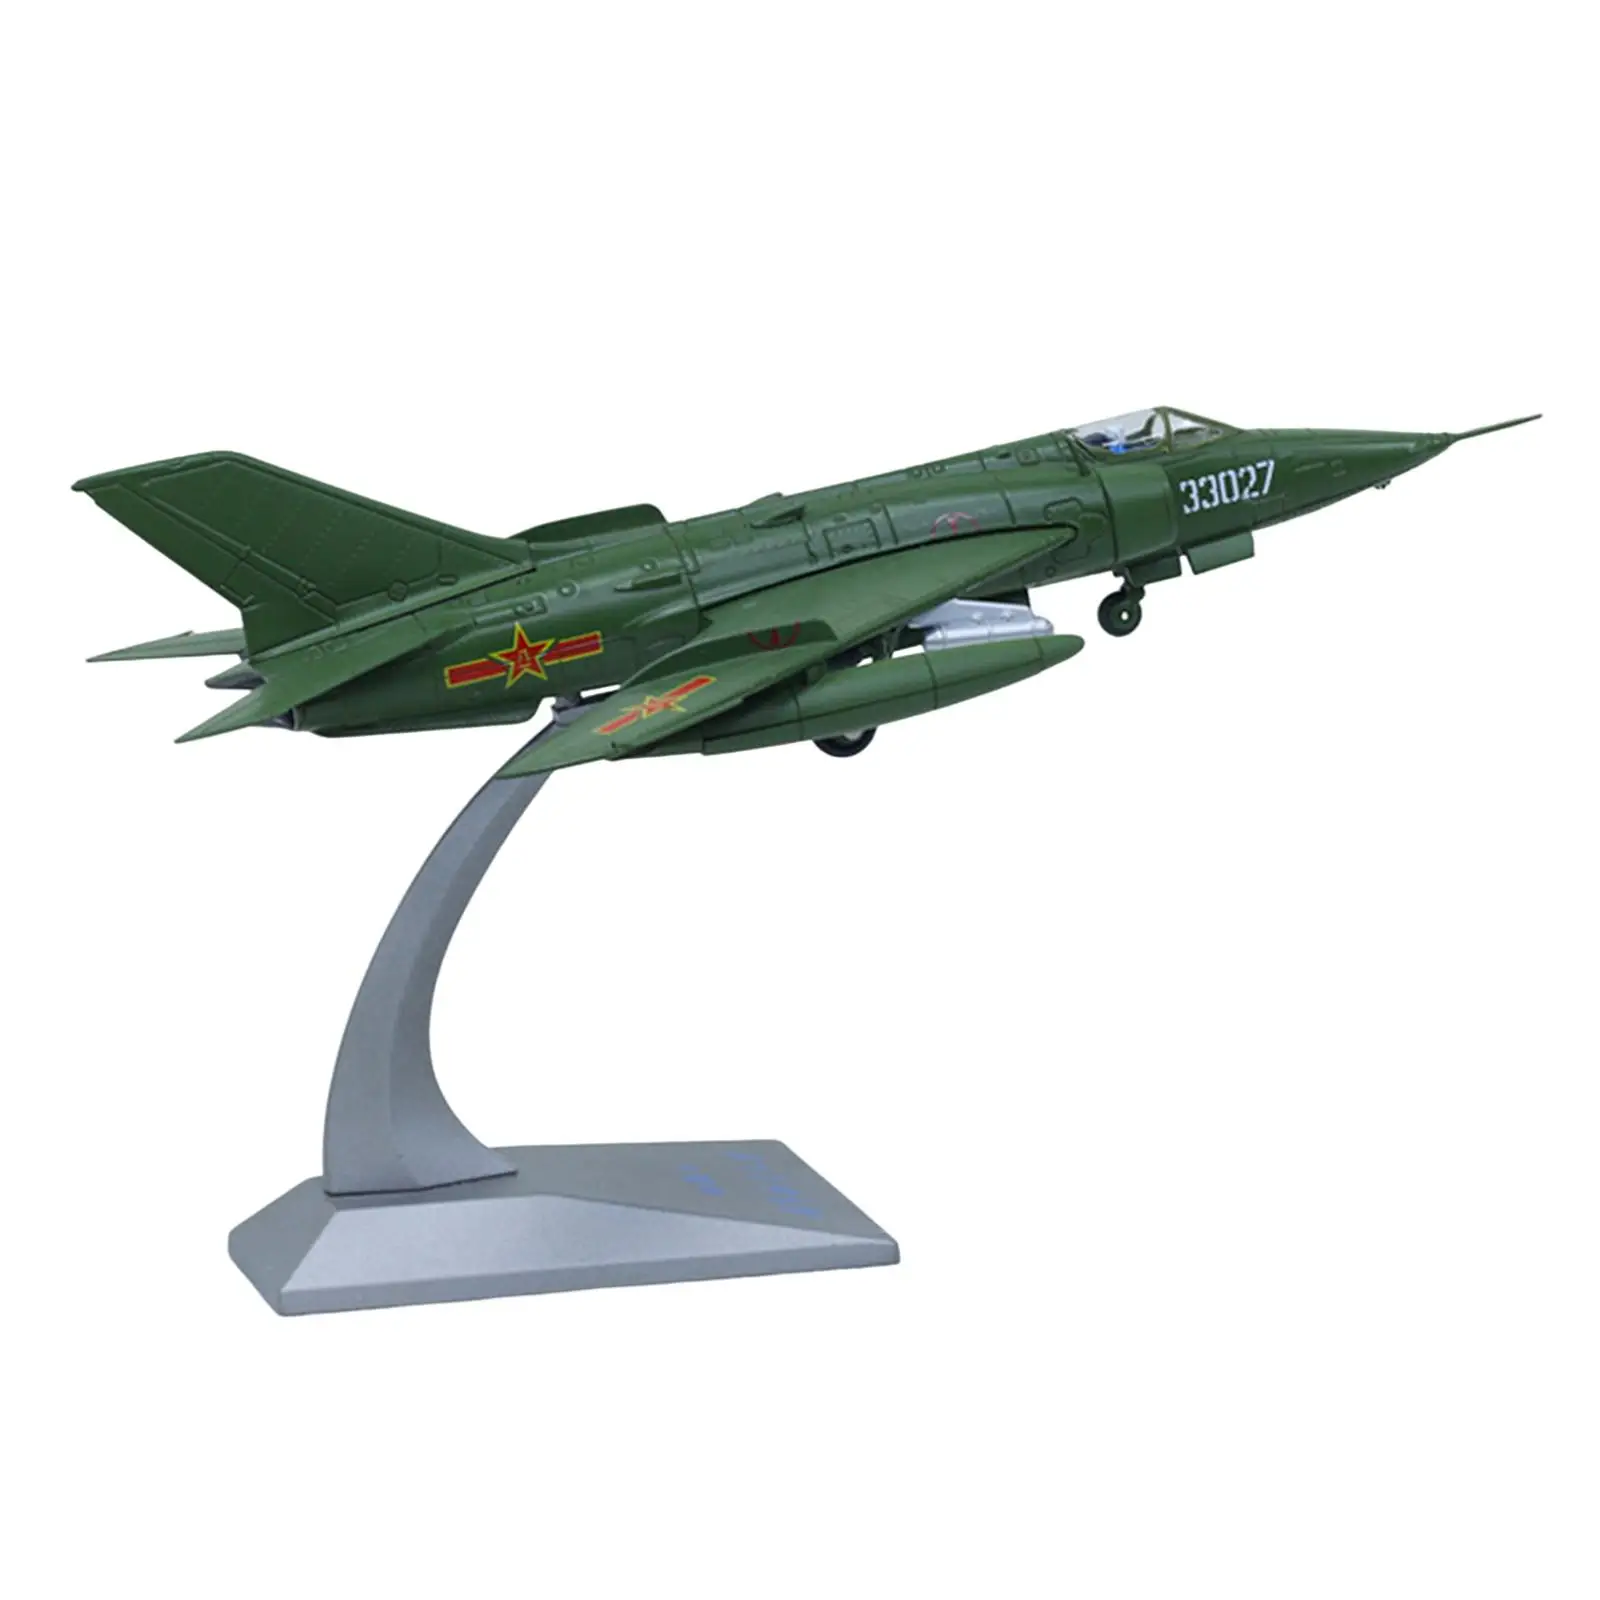 1/72 Scale Model Aircraft Airplane Collectables with Display Stand Plane Tabletop Shelf Ornament